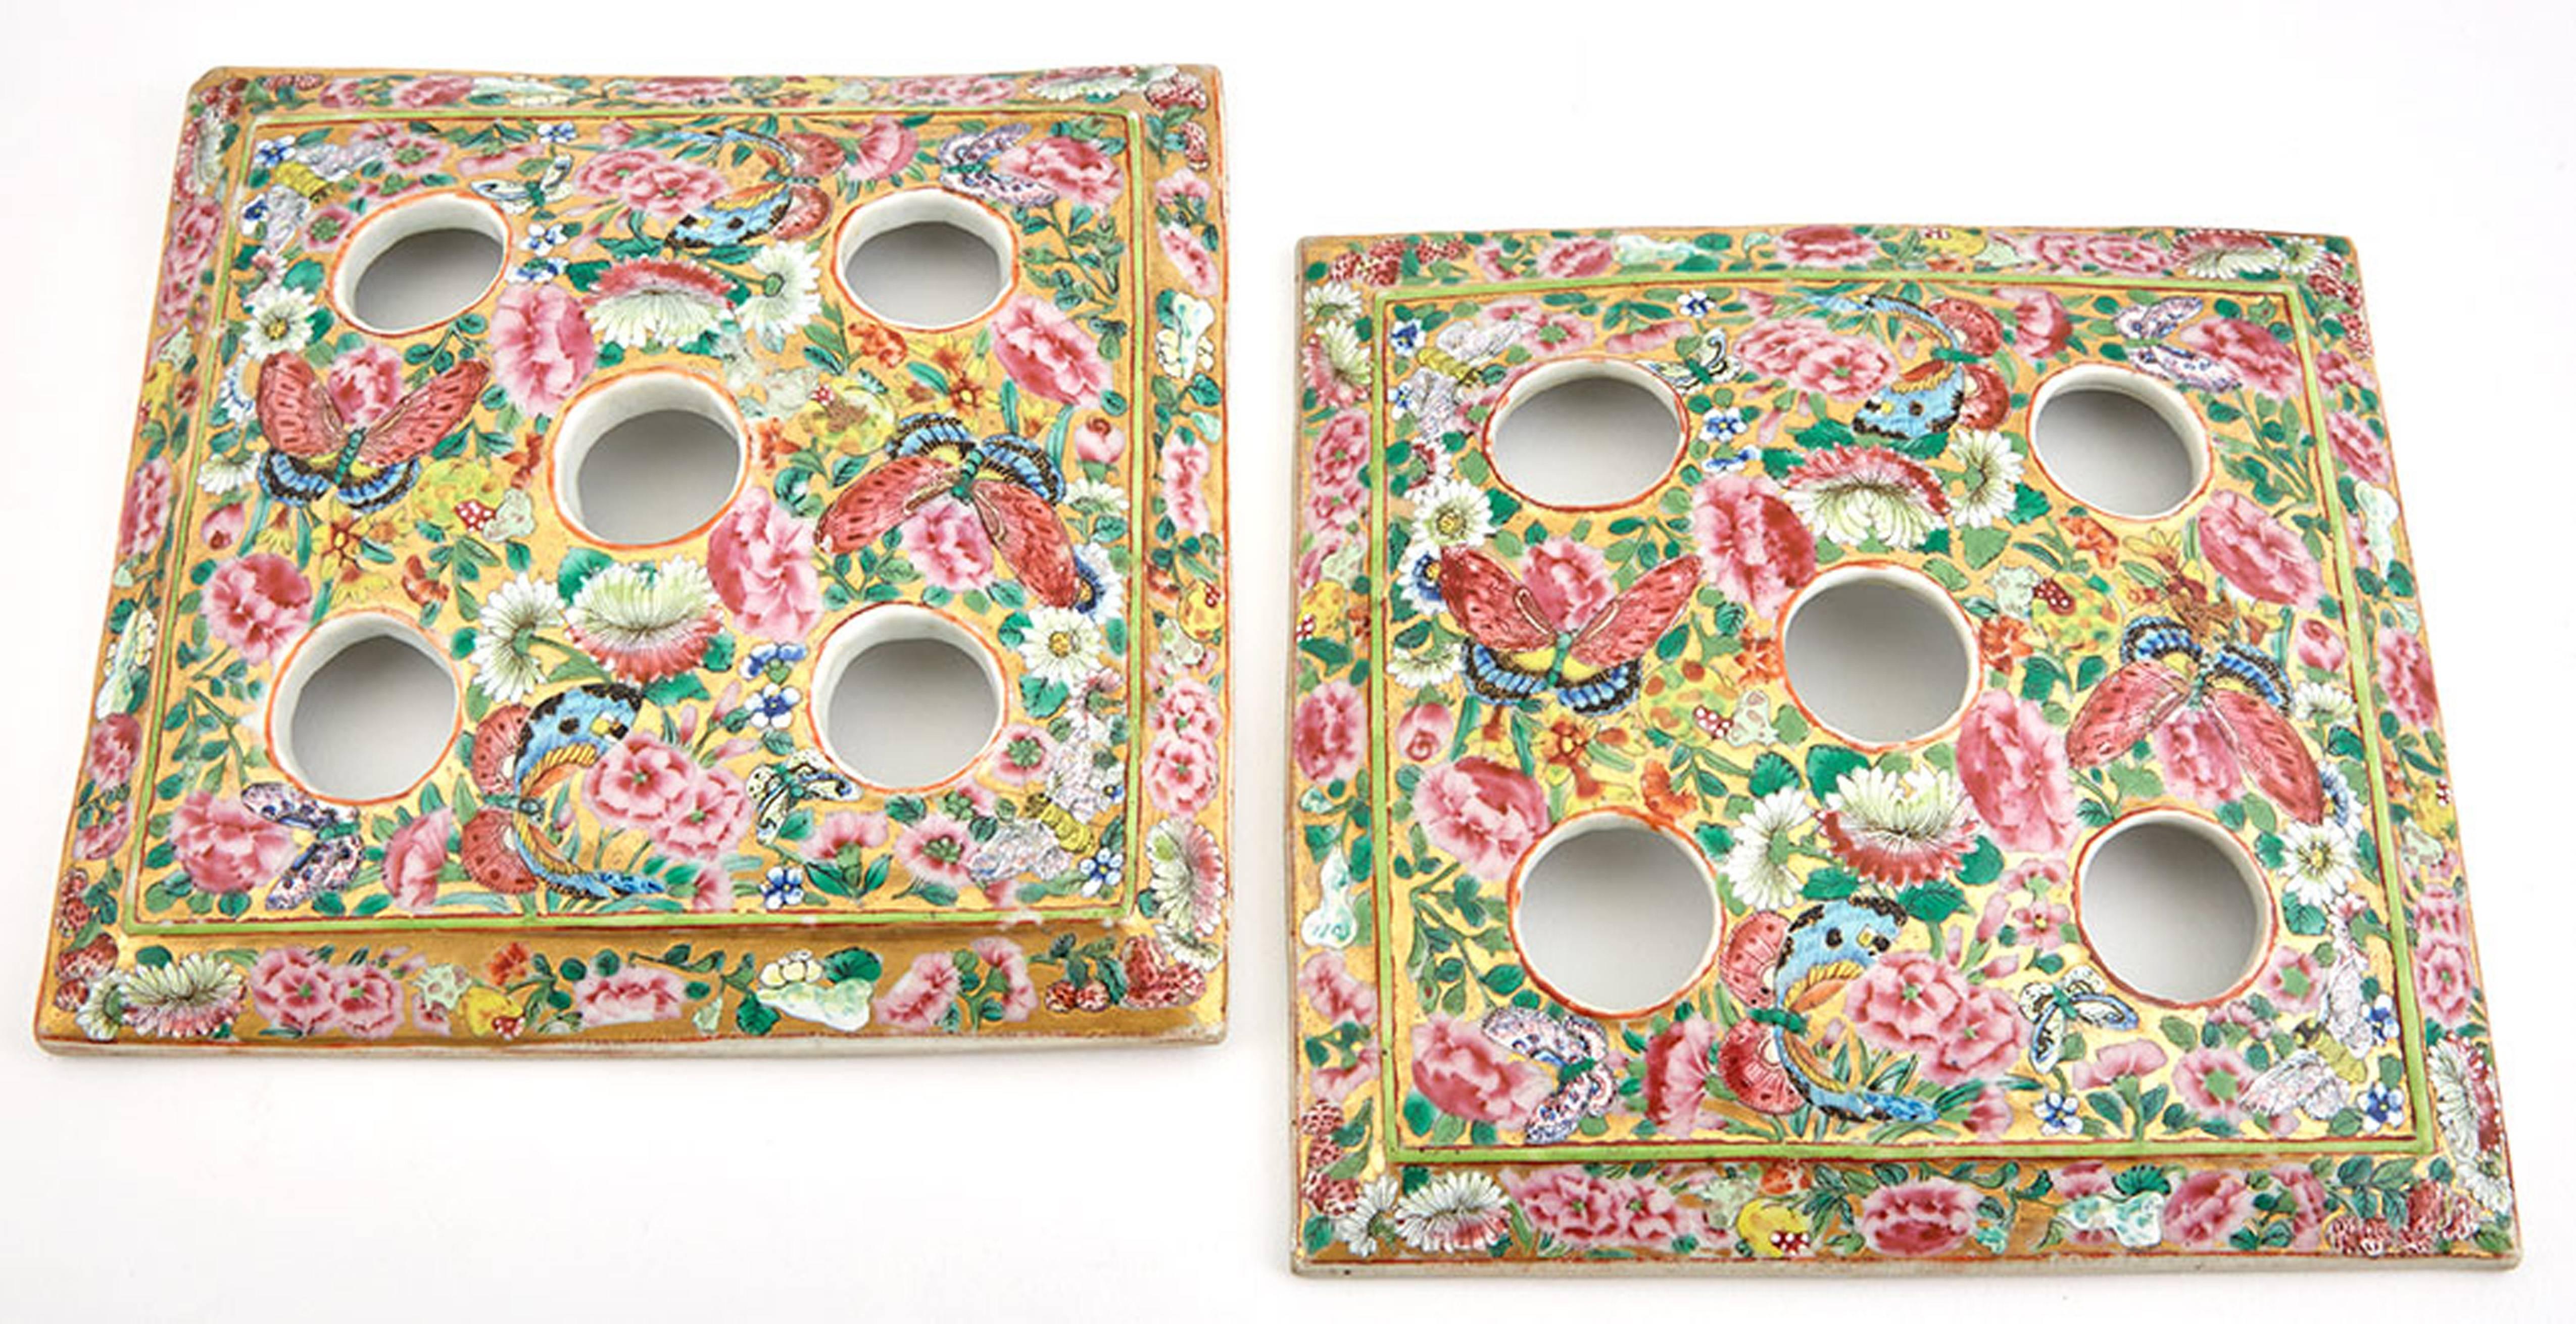 Chinese Export Porcelain Rose Mandarin Covered Cache Pots,  circa 1840-1865 1